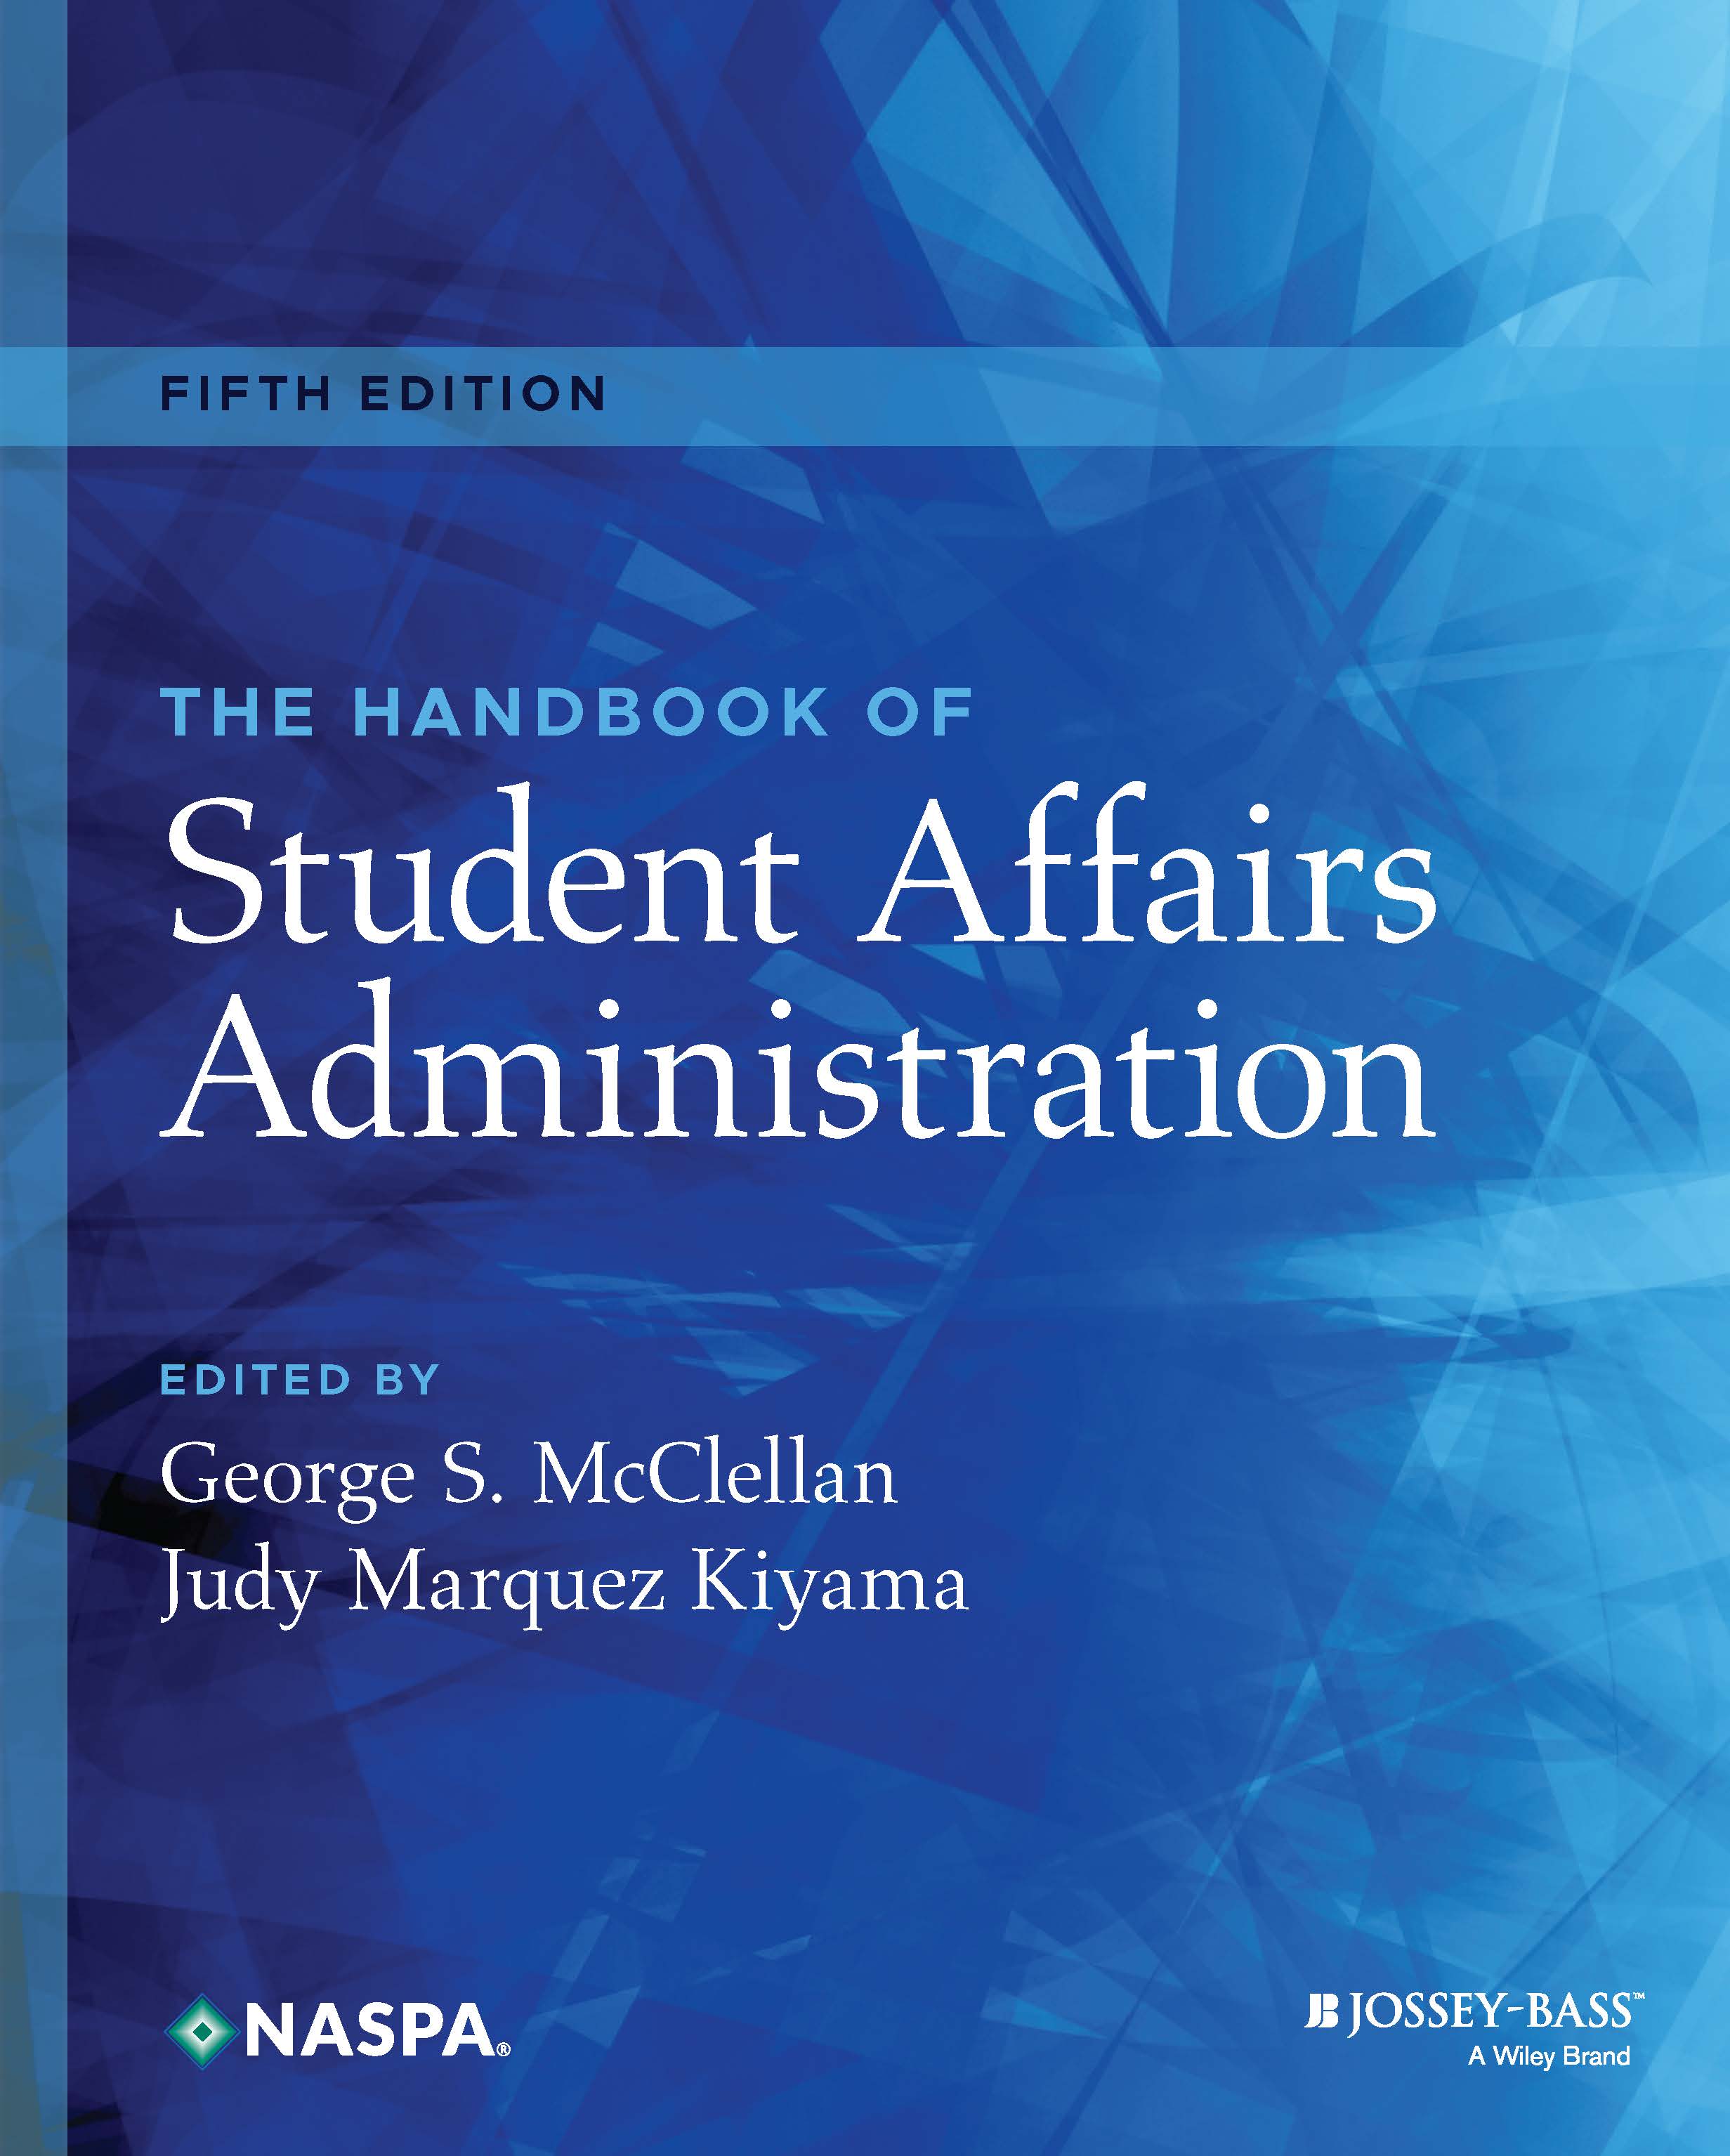 Handbook of Student Affairs 5th Edition - Cover